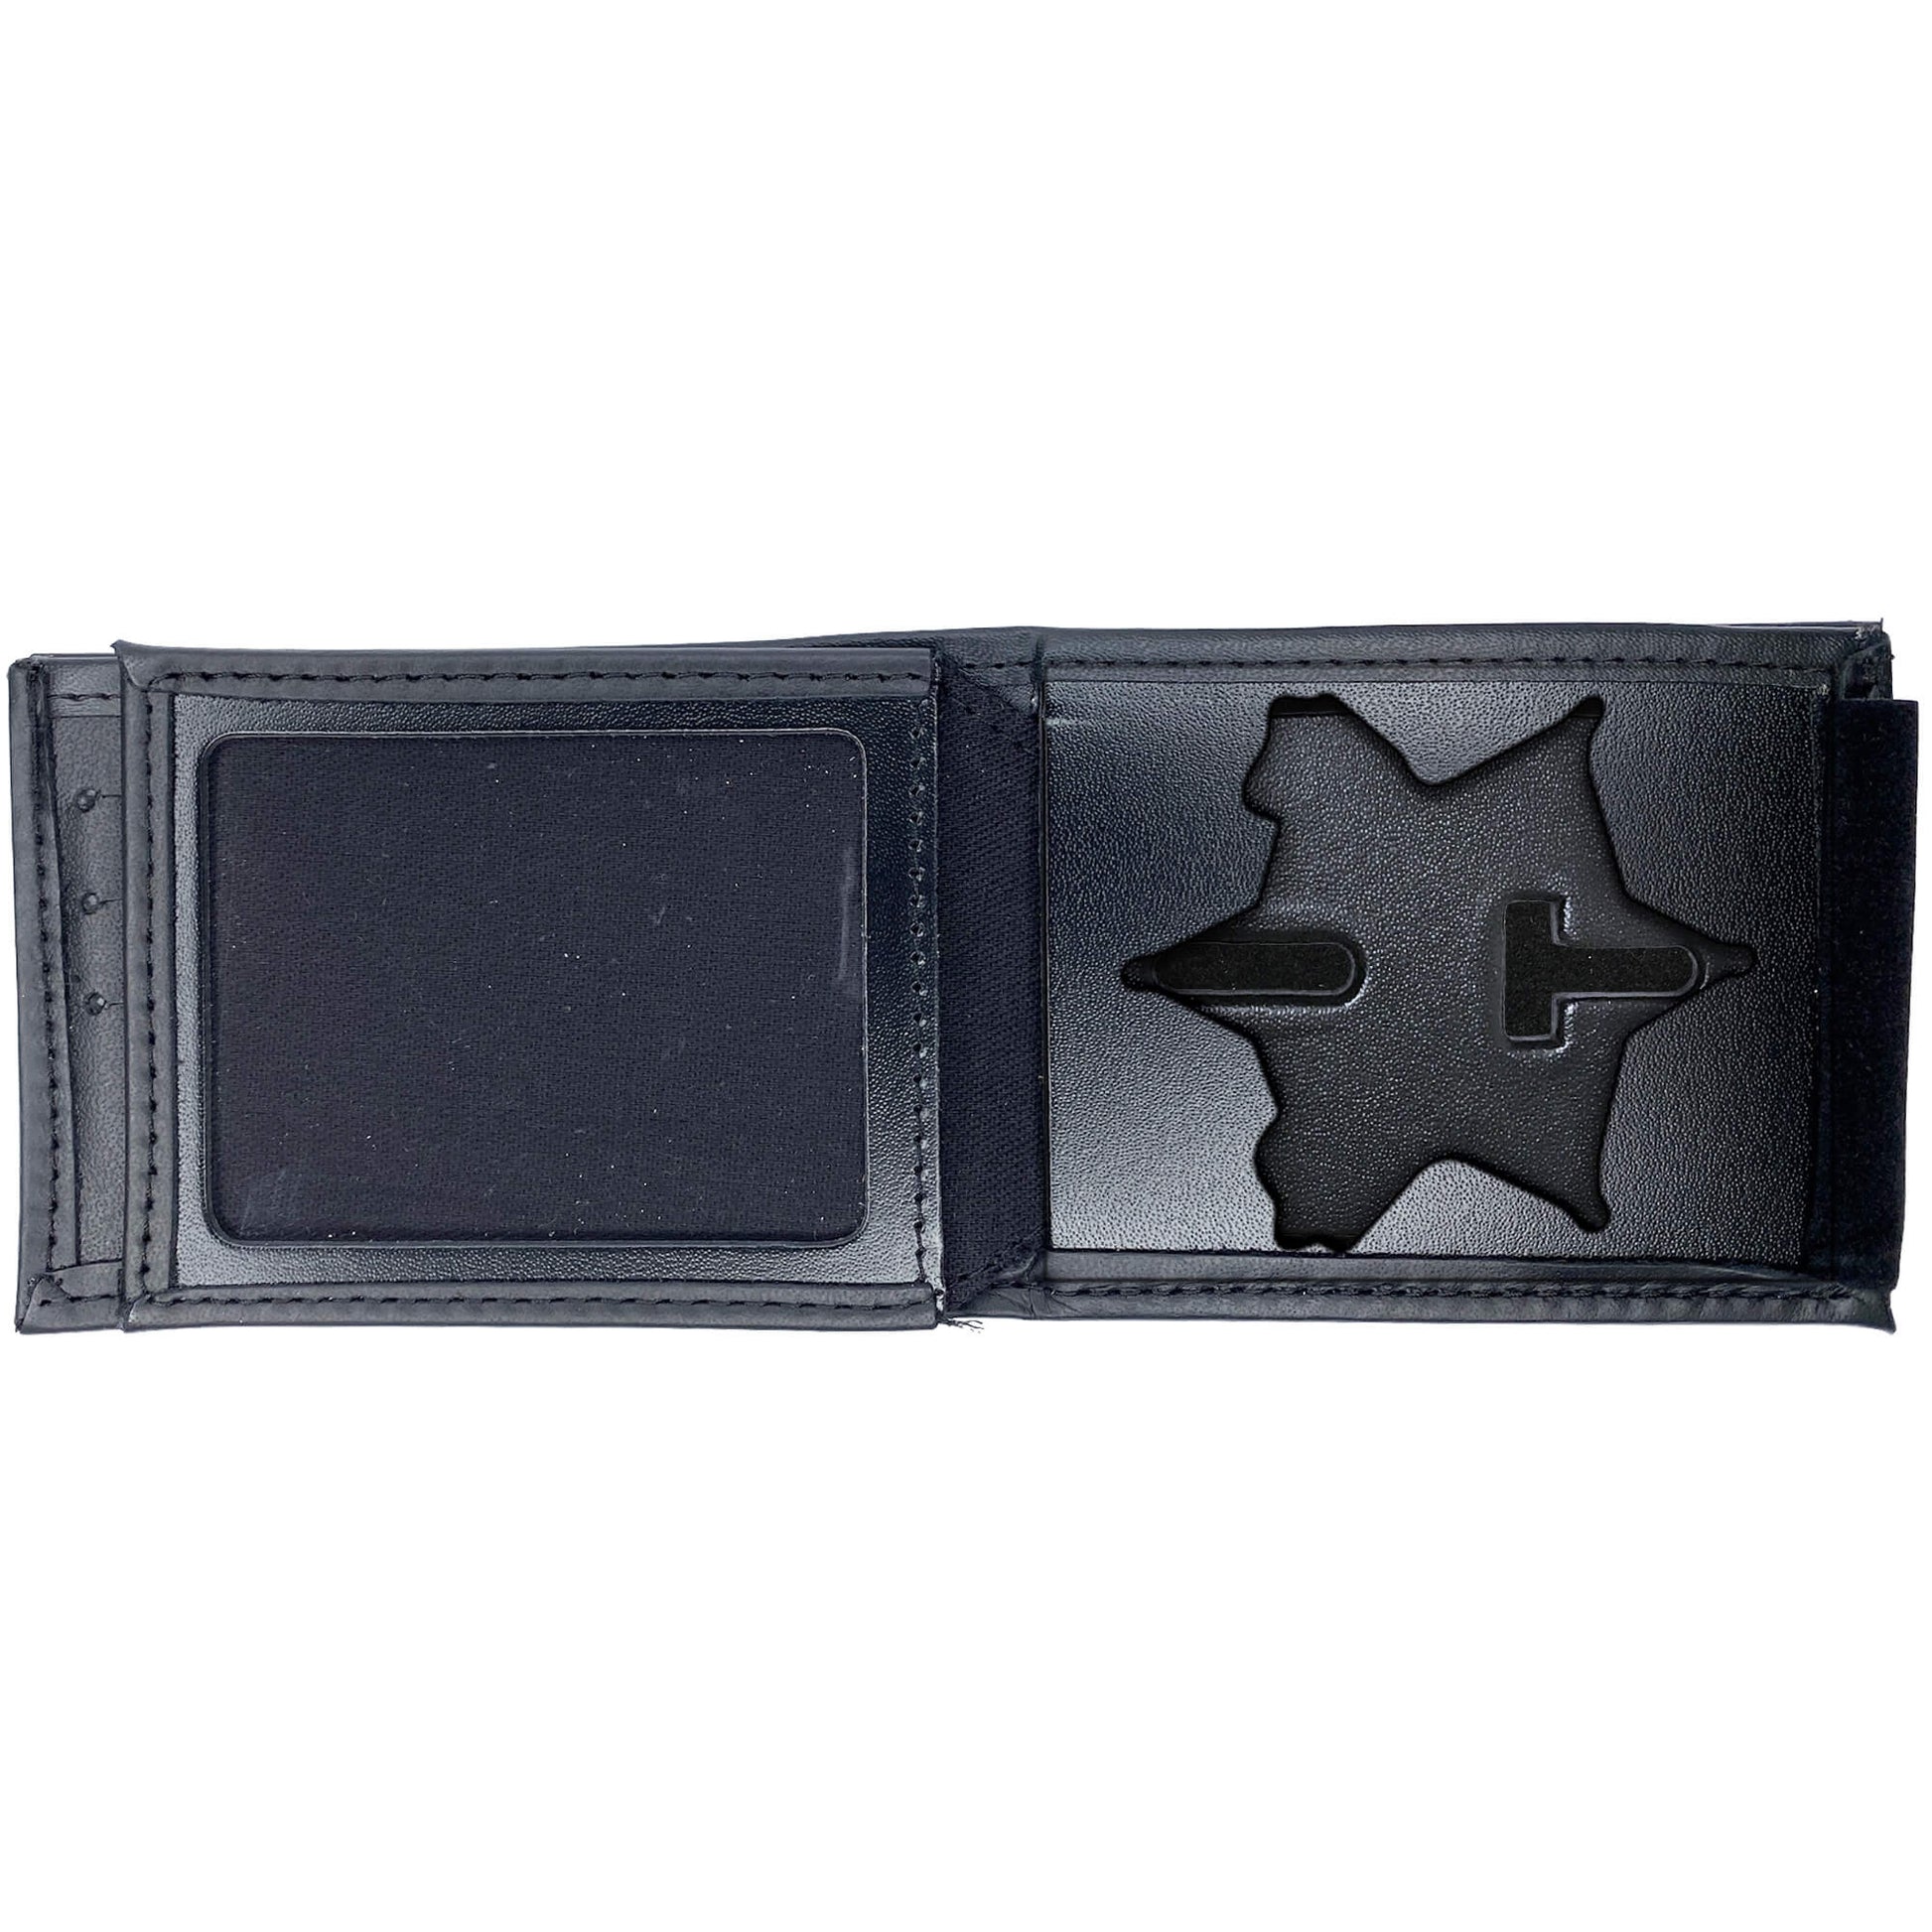 Perfect Fit County Sheriff Police Badge Wallet 6PT Star Fits Many